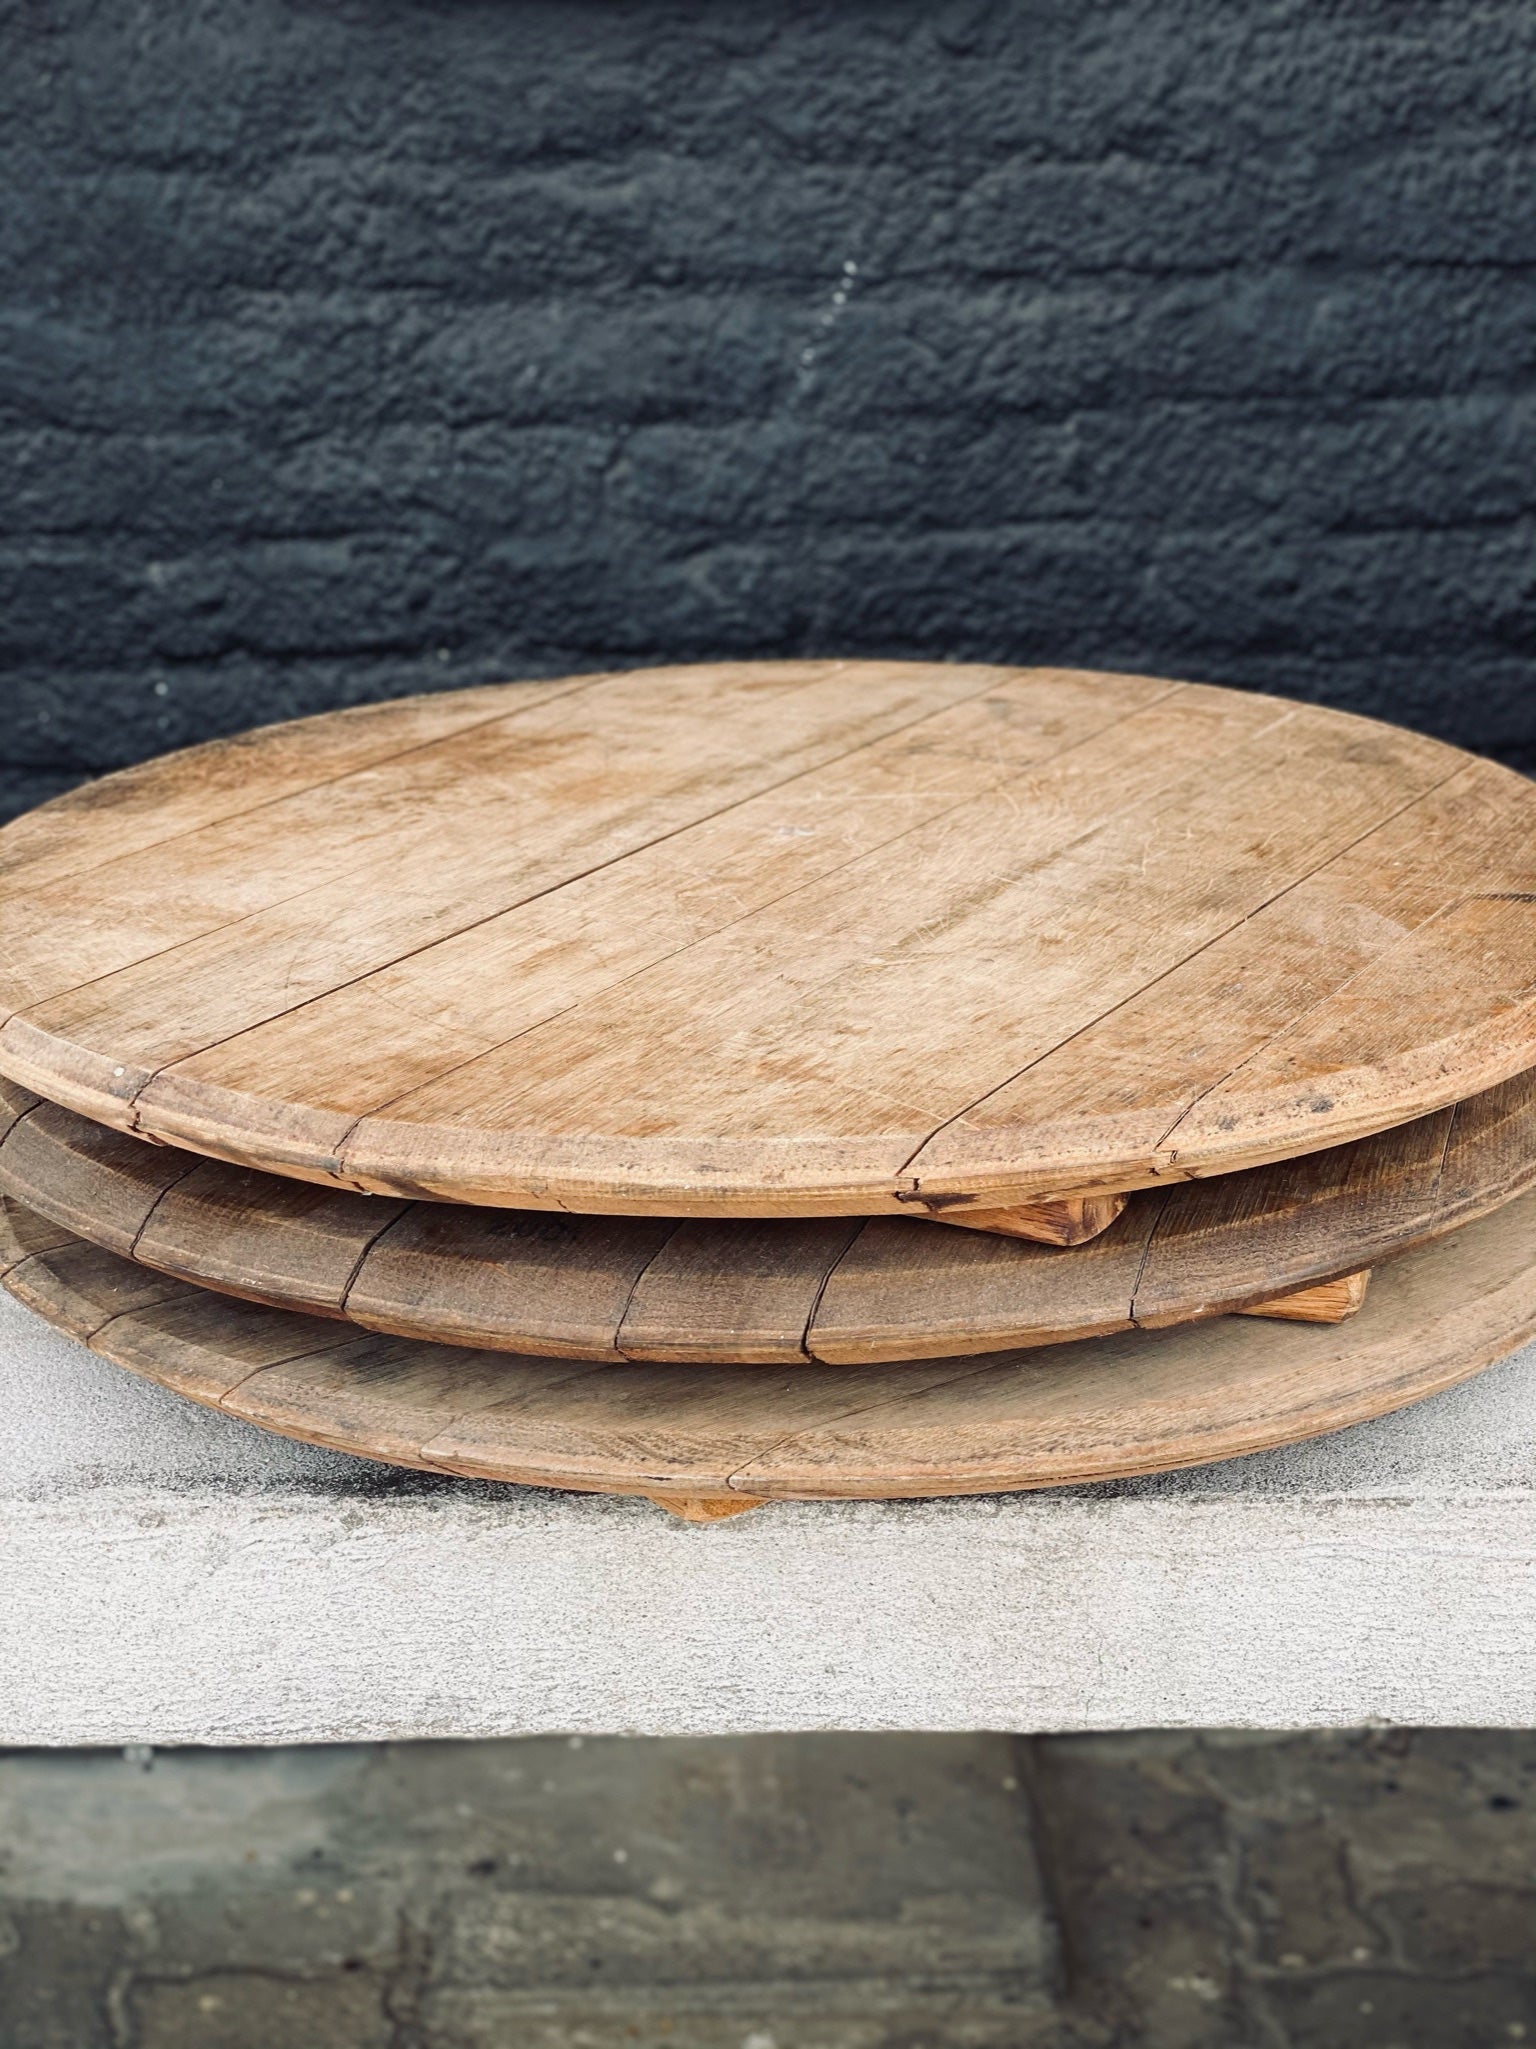 Vintage Imprinted Wooden Large Cheese Boards